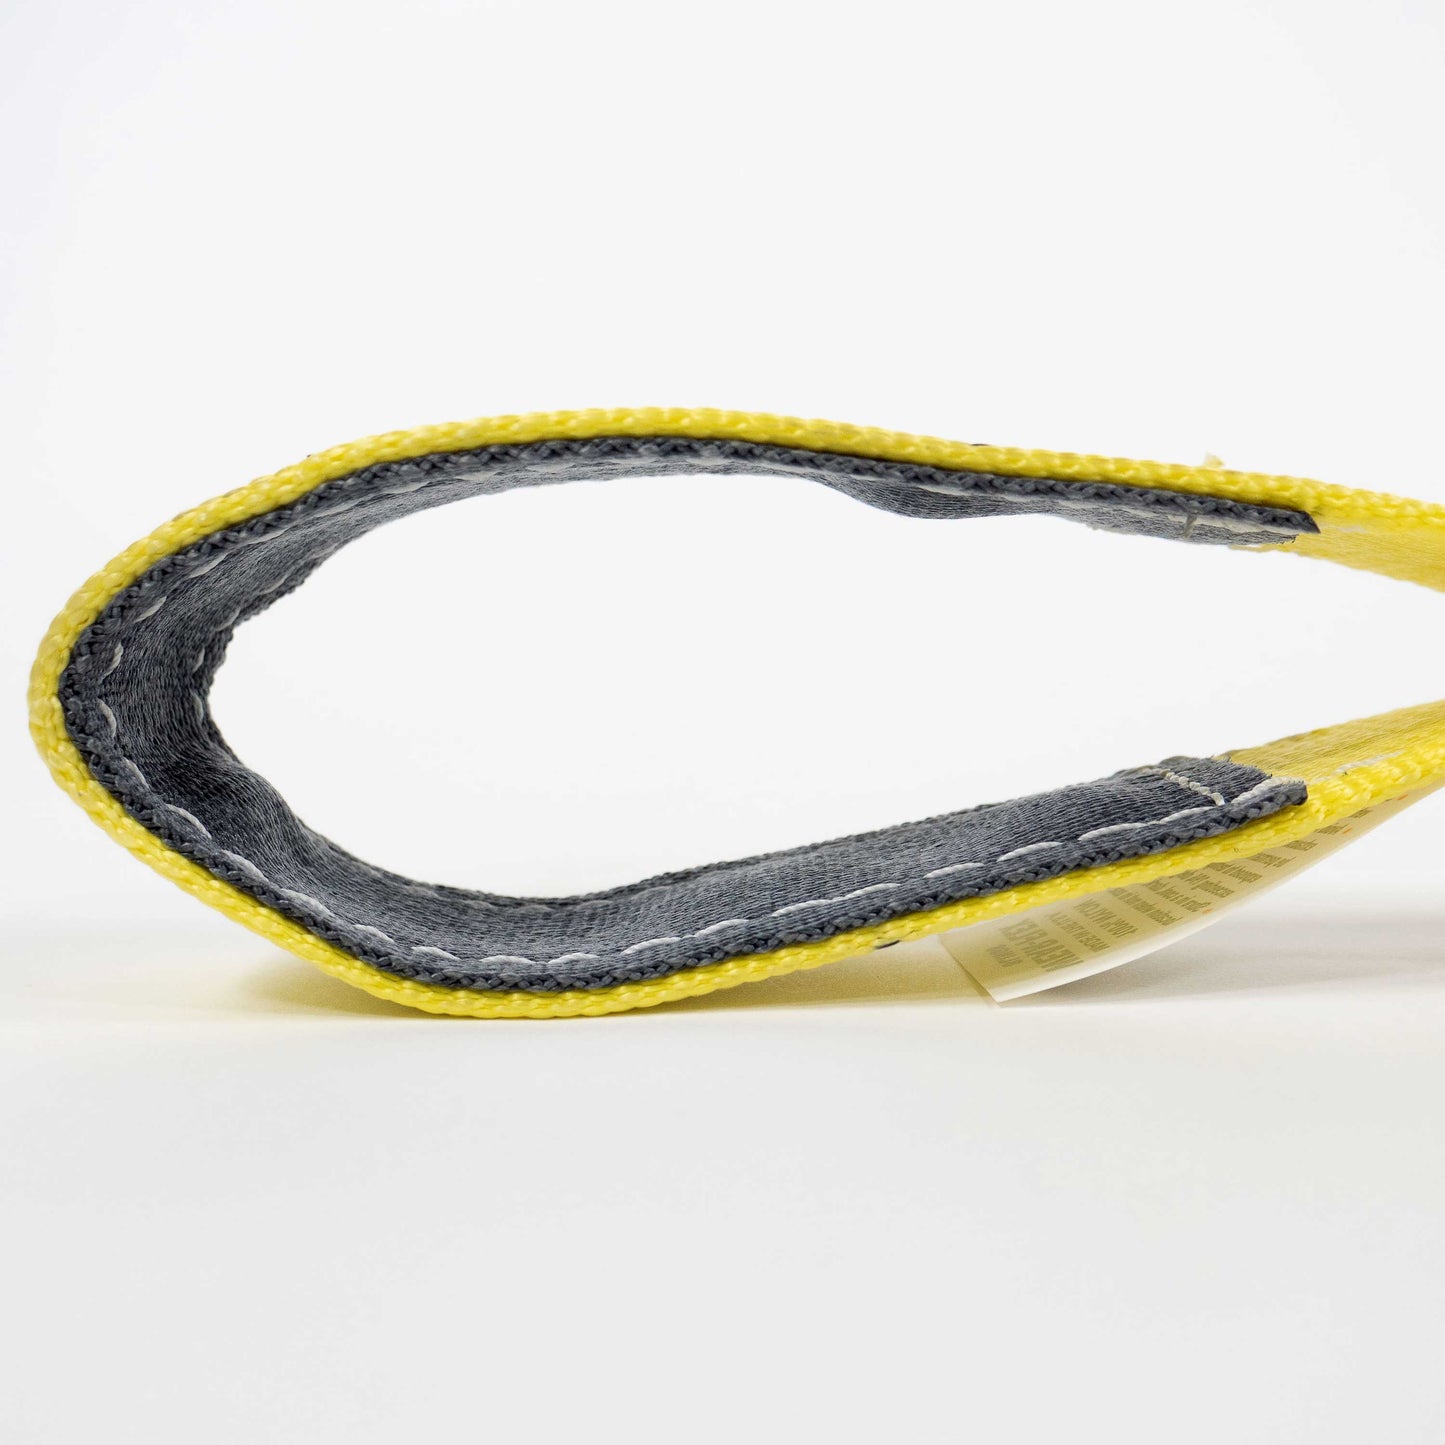 2" x 20' Recovery Strap with Reinforced Cordura Eyes - 2 Ply | 16,000 WLL